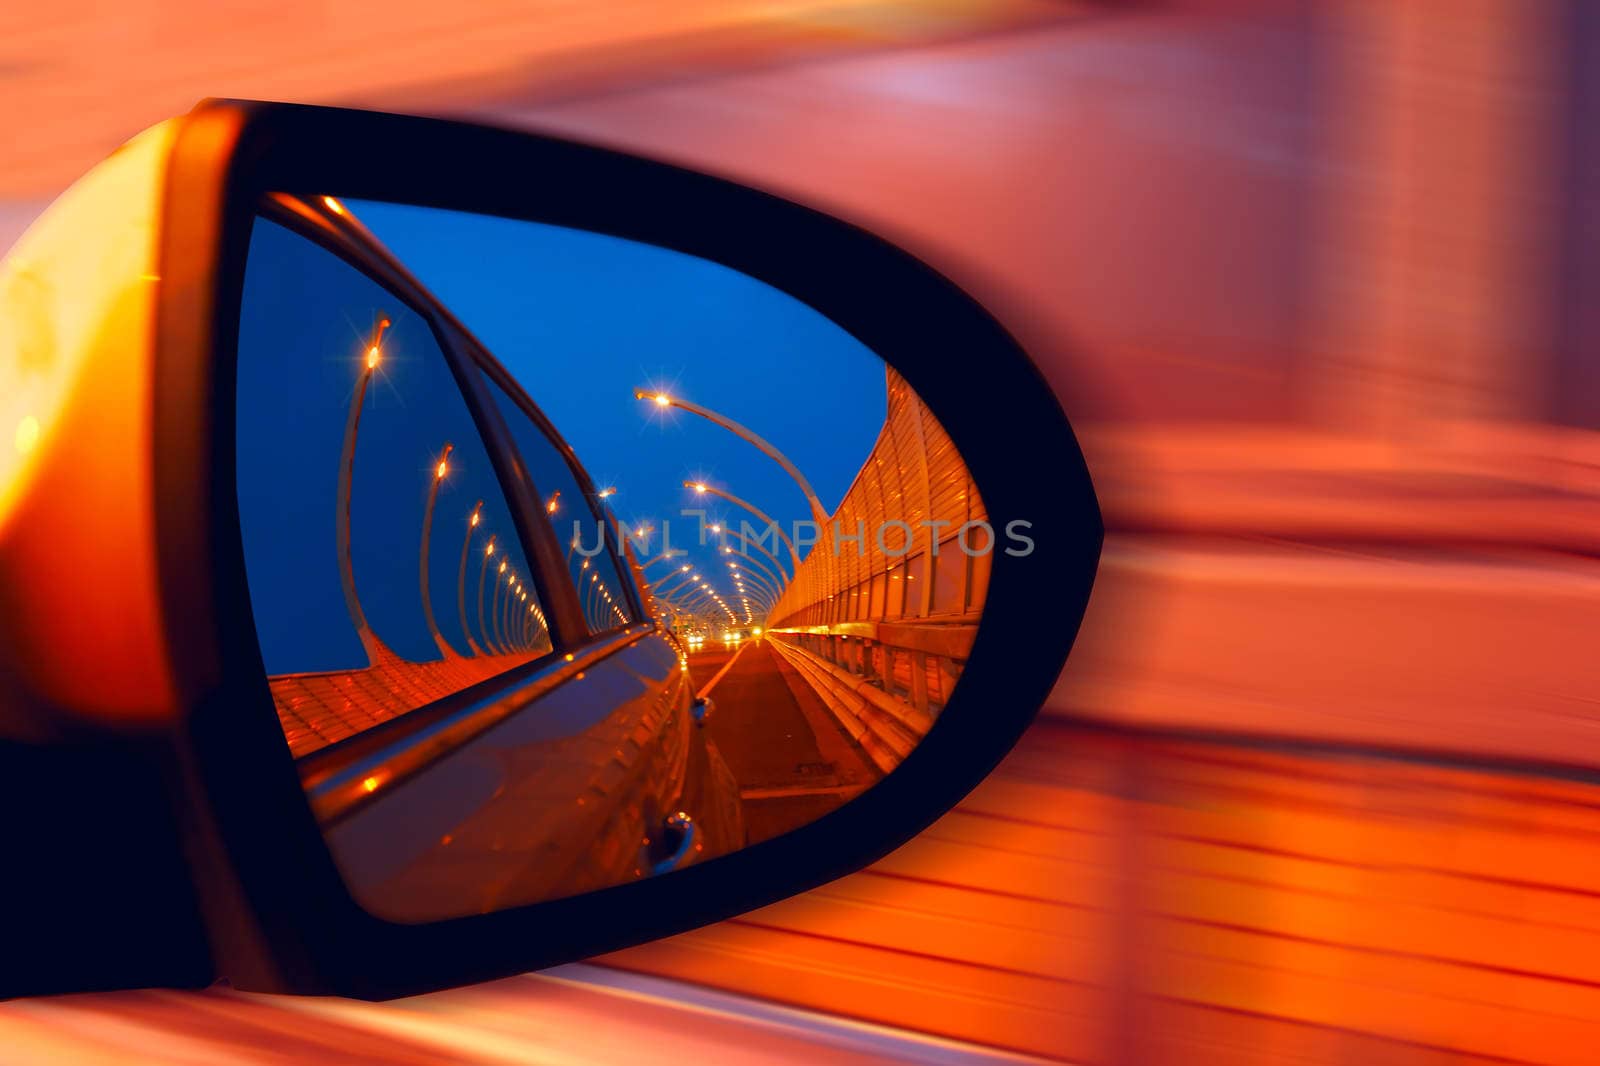 Reflection of  hidgway in the mirror of a car